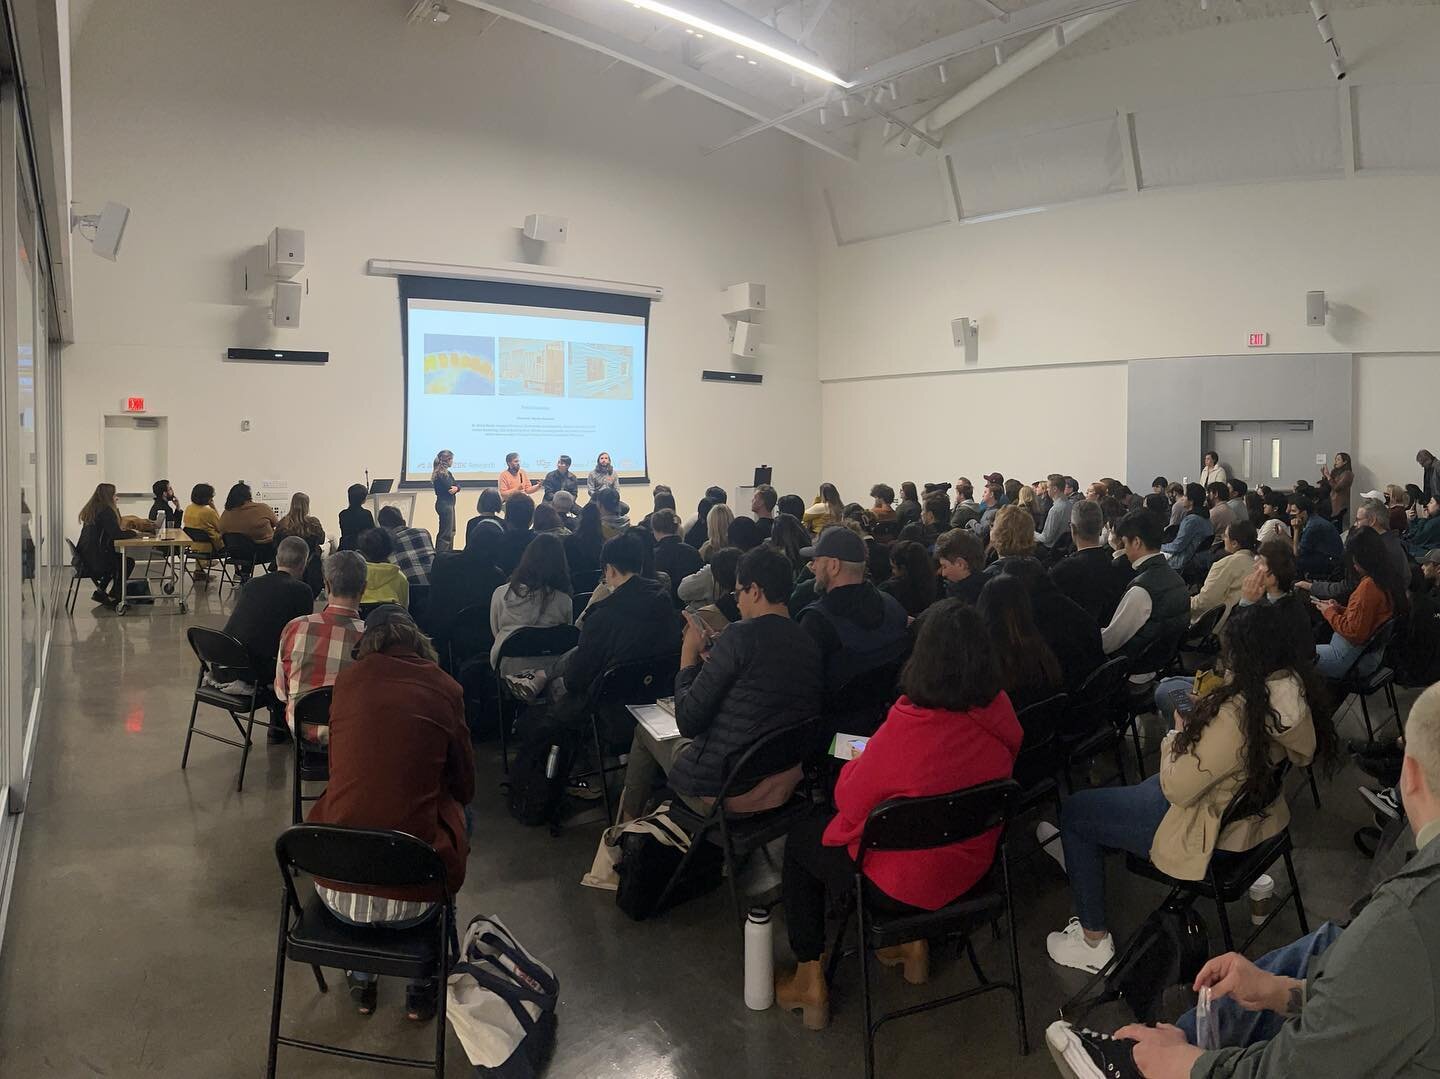 Full house in person and online at last night&rsquo;s panel BIOMATERIALS: INDUSTRY AND ACADEMIA CONVERGENCE. This event, part of the Academic Alliance between CCA &amp; Autodesk Technology Center, brought together designers, researchers, and industry